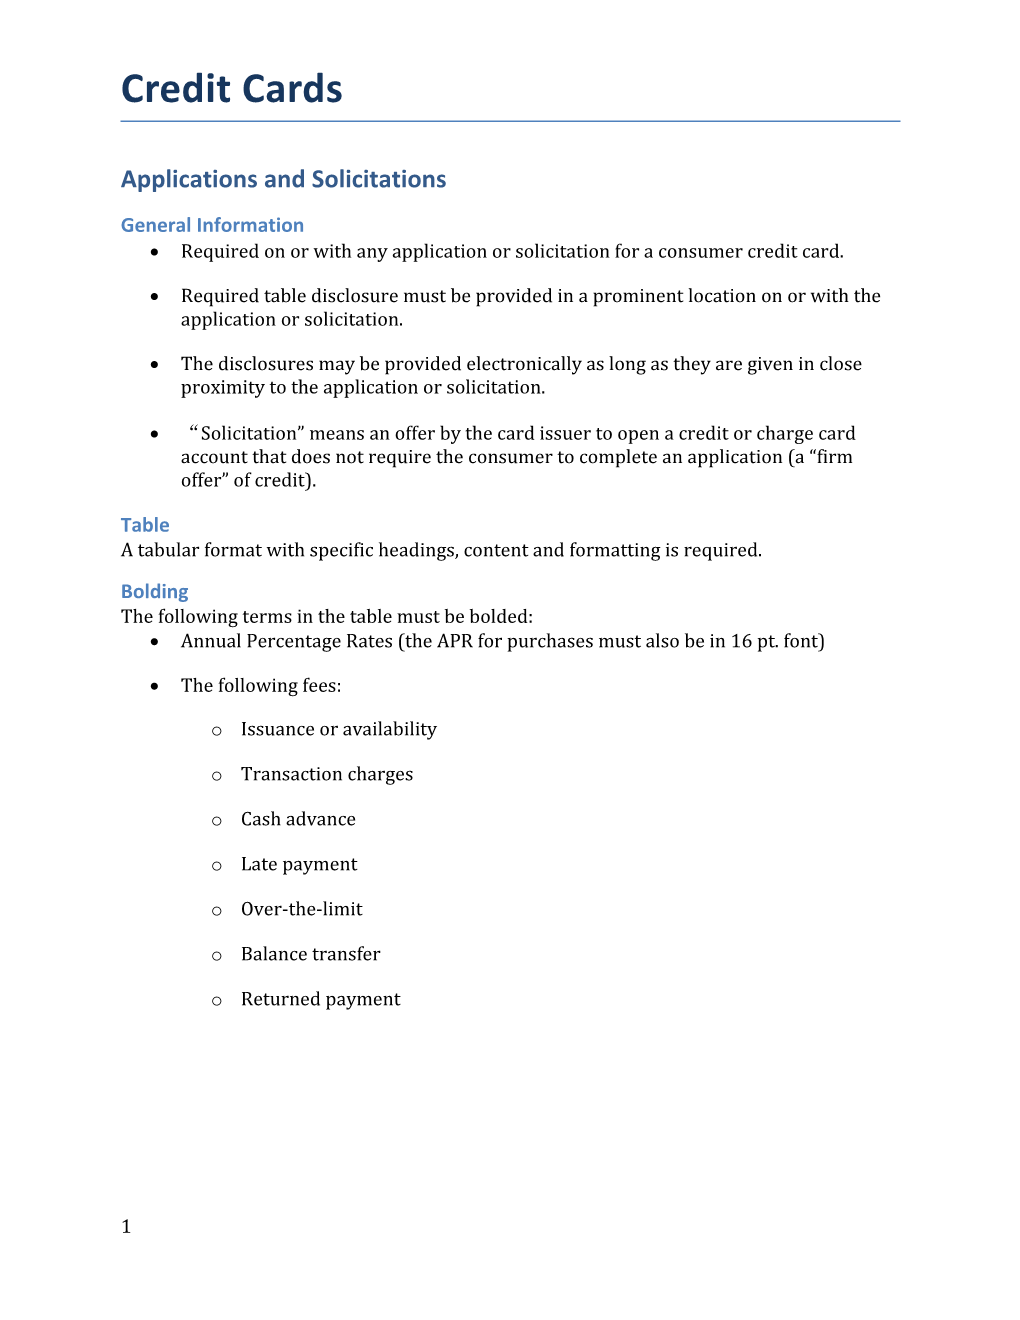 Applications and Solicitations